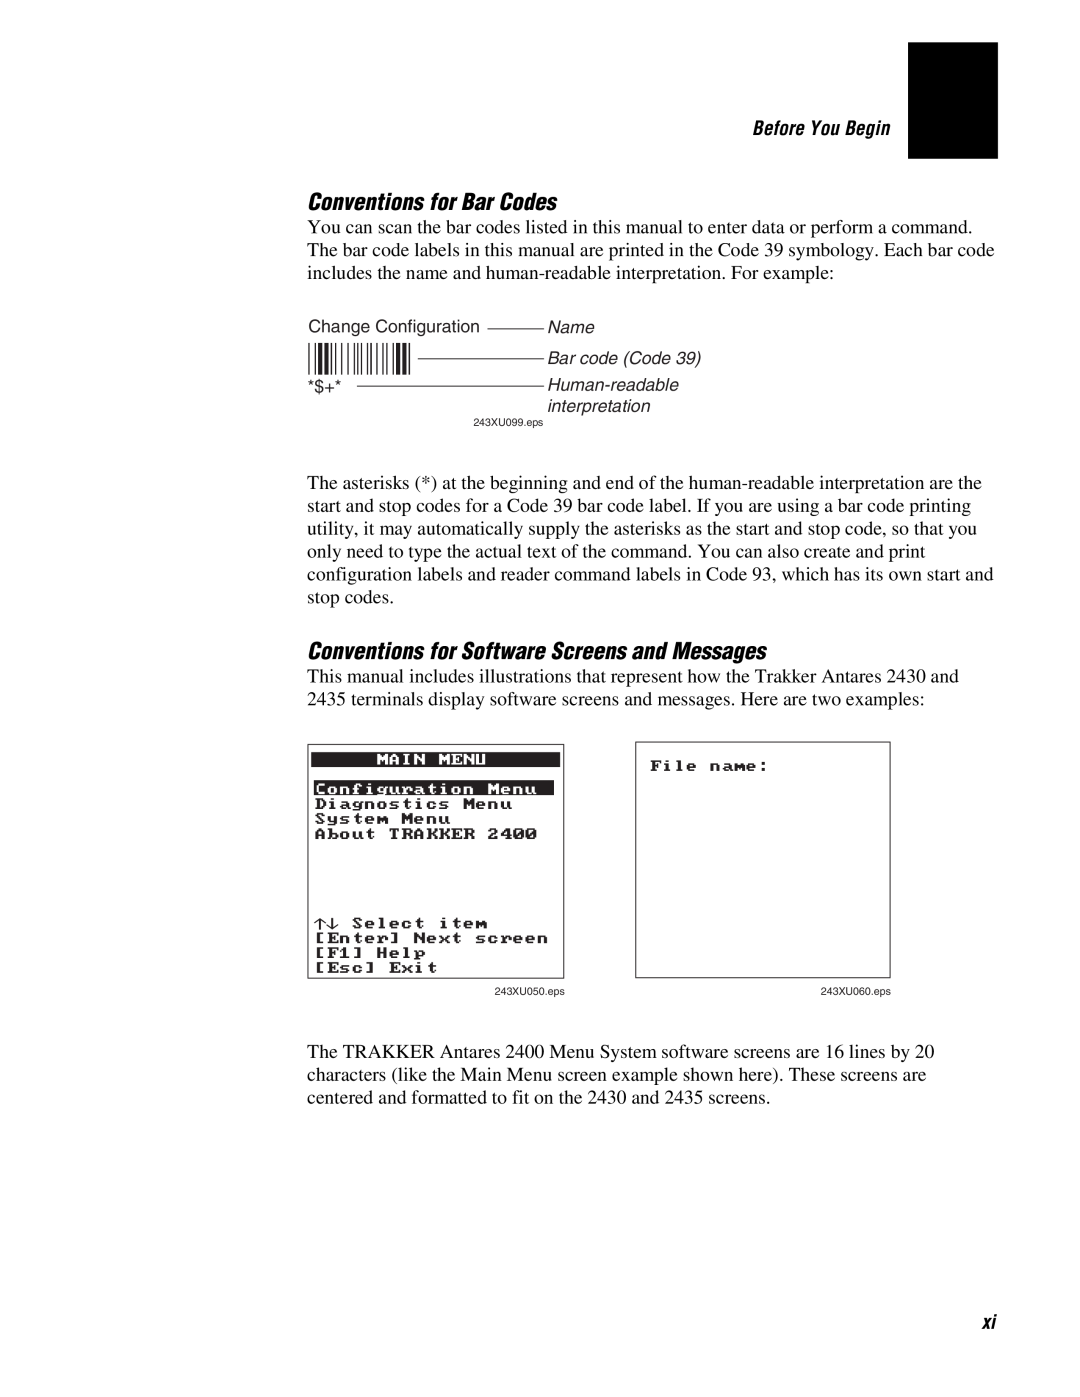 IBM 243X user manual Conventions for Bar Codes, Conventions for Software Screens and Messages, Before You Begin 